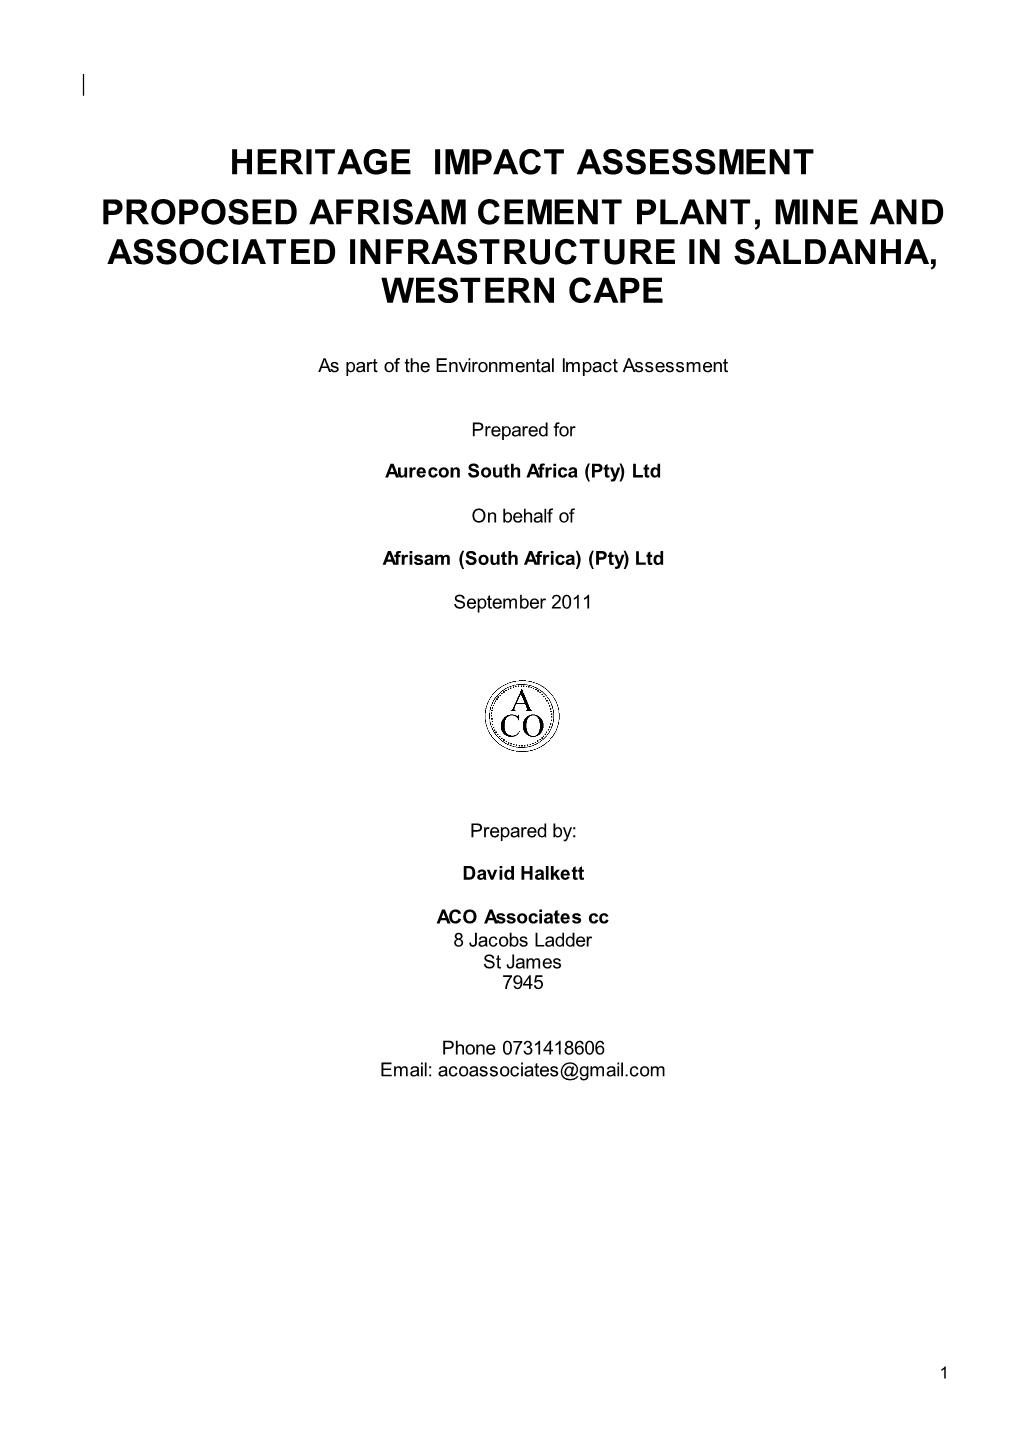 Heritage Impact Assessment Proposed Afrisam Cement Plant, Mine and Associated Infrastructure in Saldanha, Western Cape